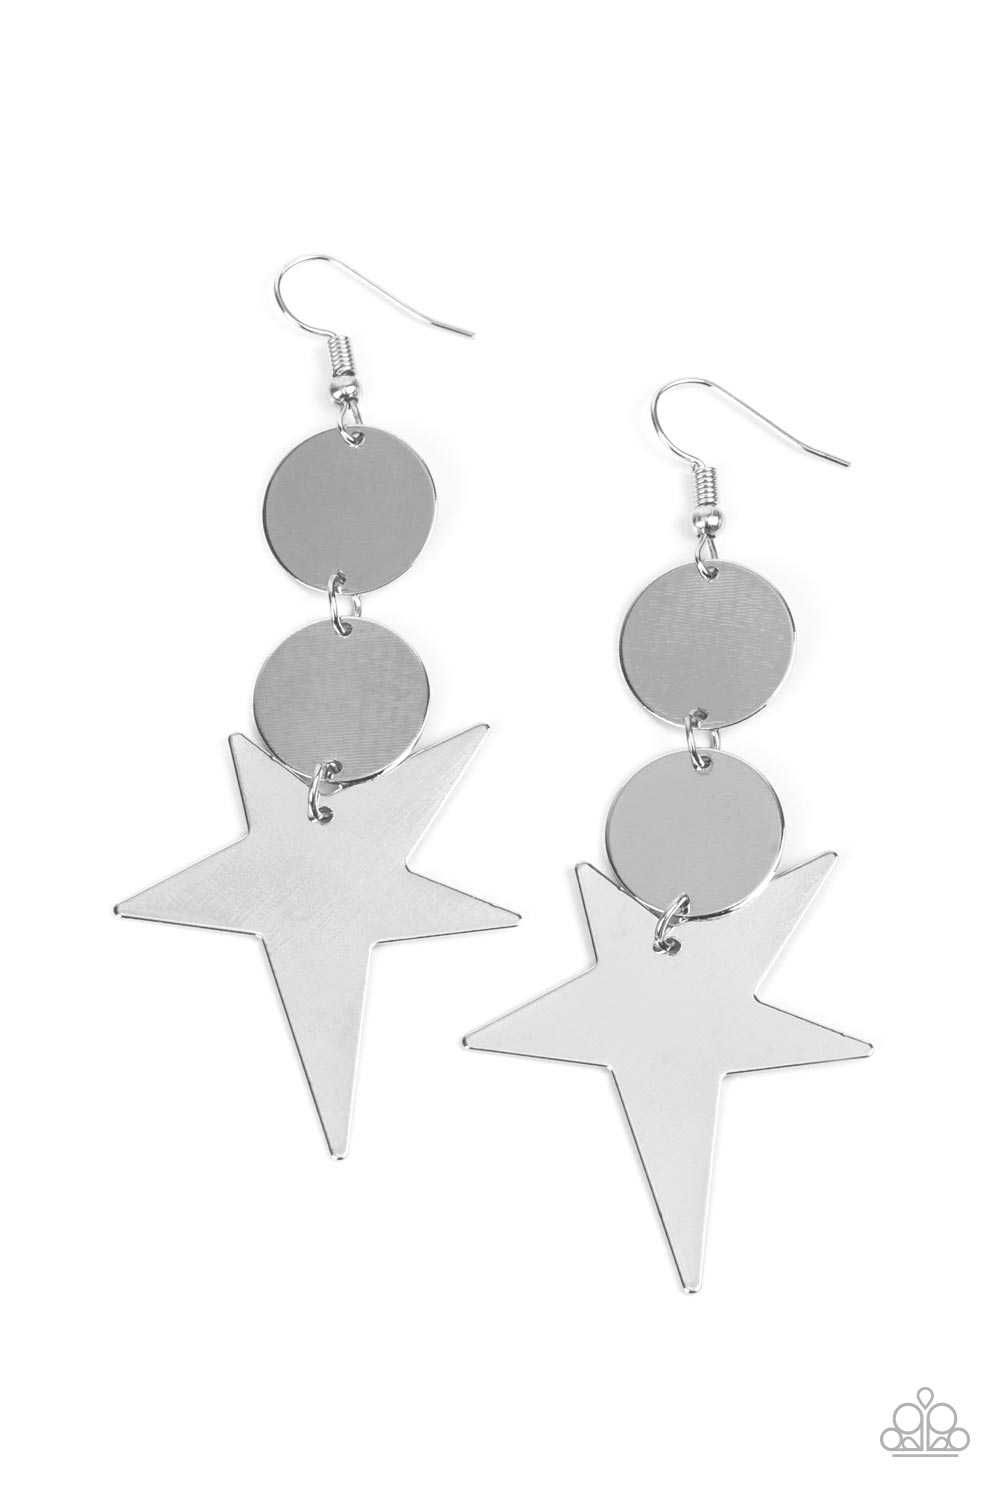 Star Bizzare - Silver Earrings an asymmetrical silver star radiates from two linked flat silver discs, resulting in a stellar lure. Earring attaches to a standard fishhook fitting.  Sold as one pair of earrings.